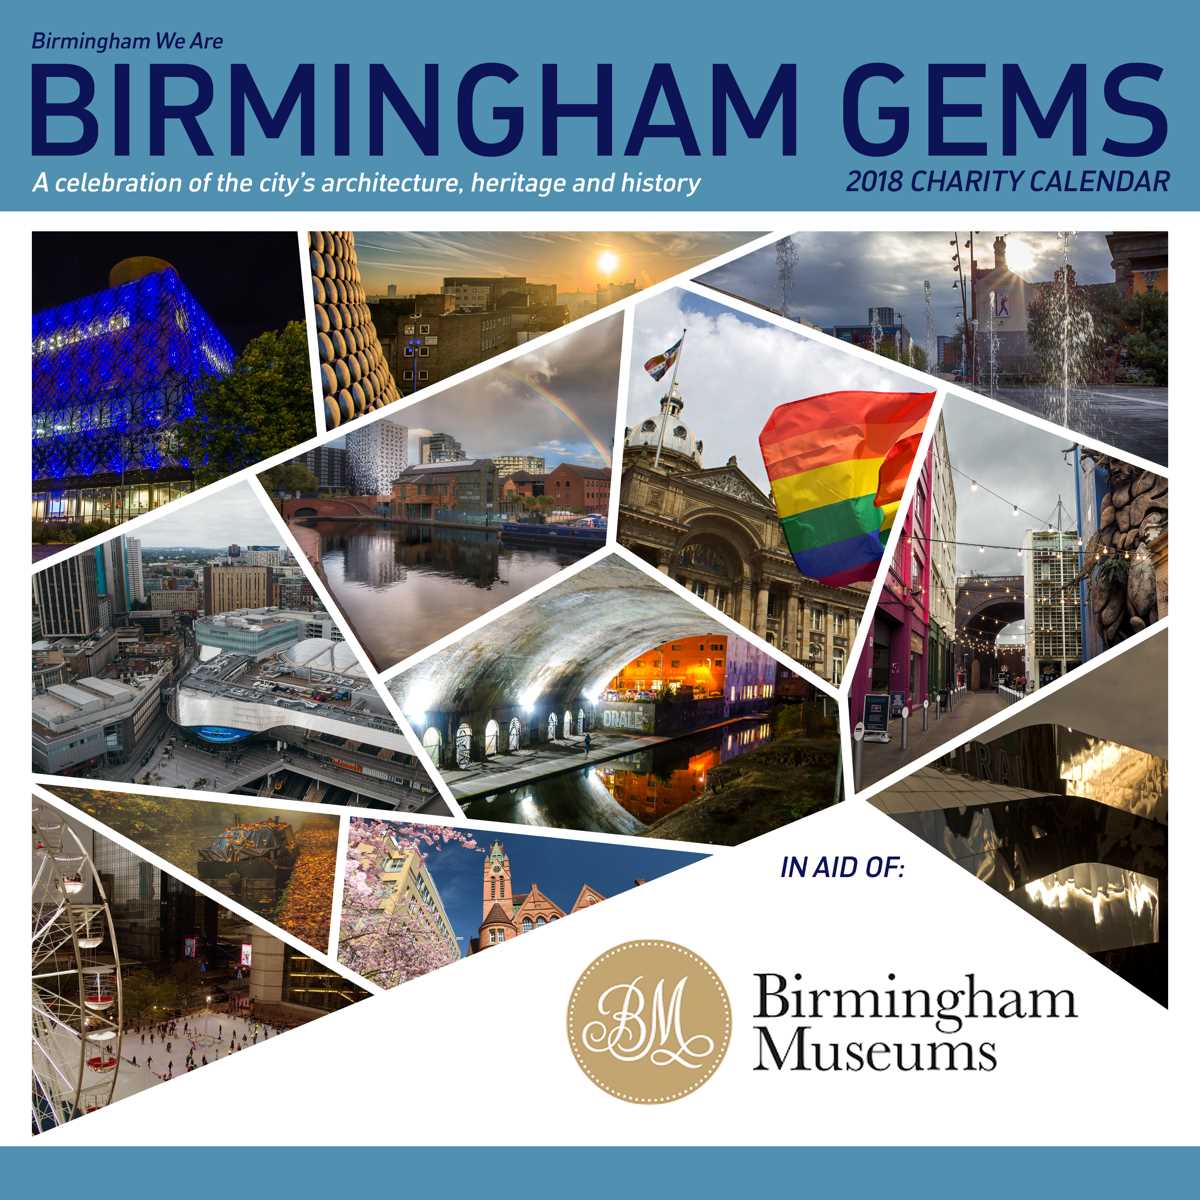 Photos selected for Birmingham Gems 2018 Calendar - they're fantastic! Take a look.